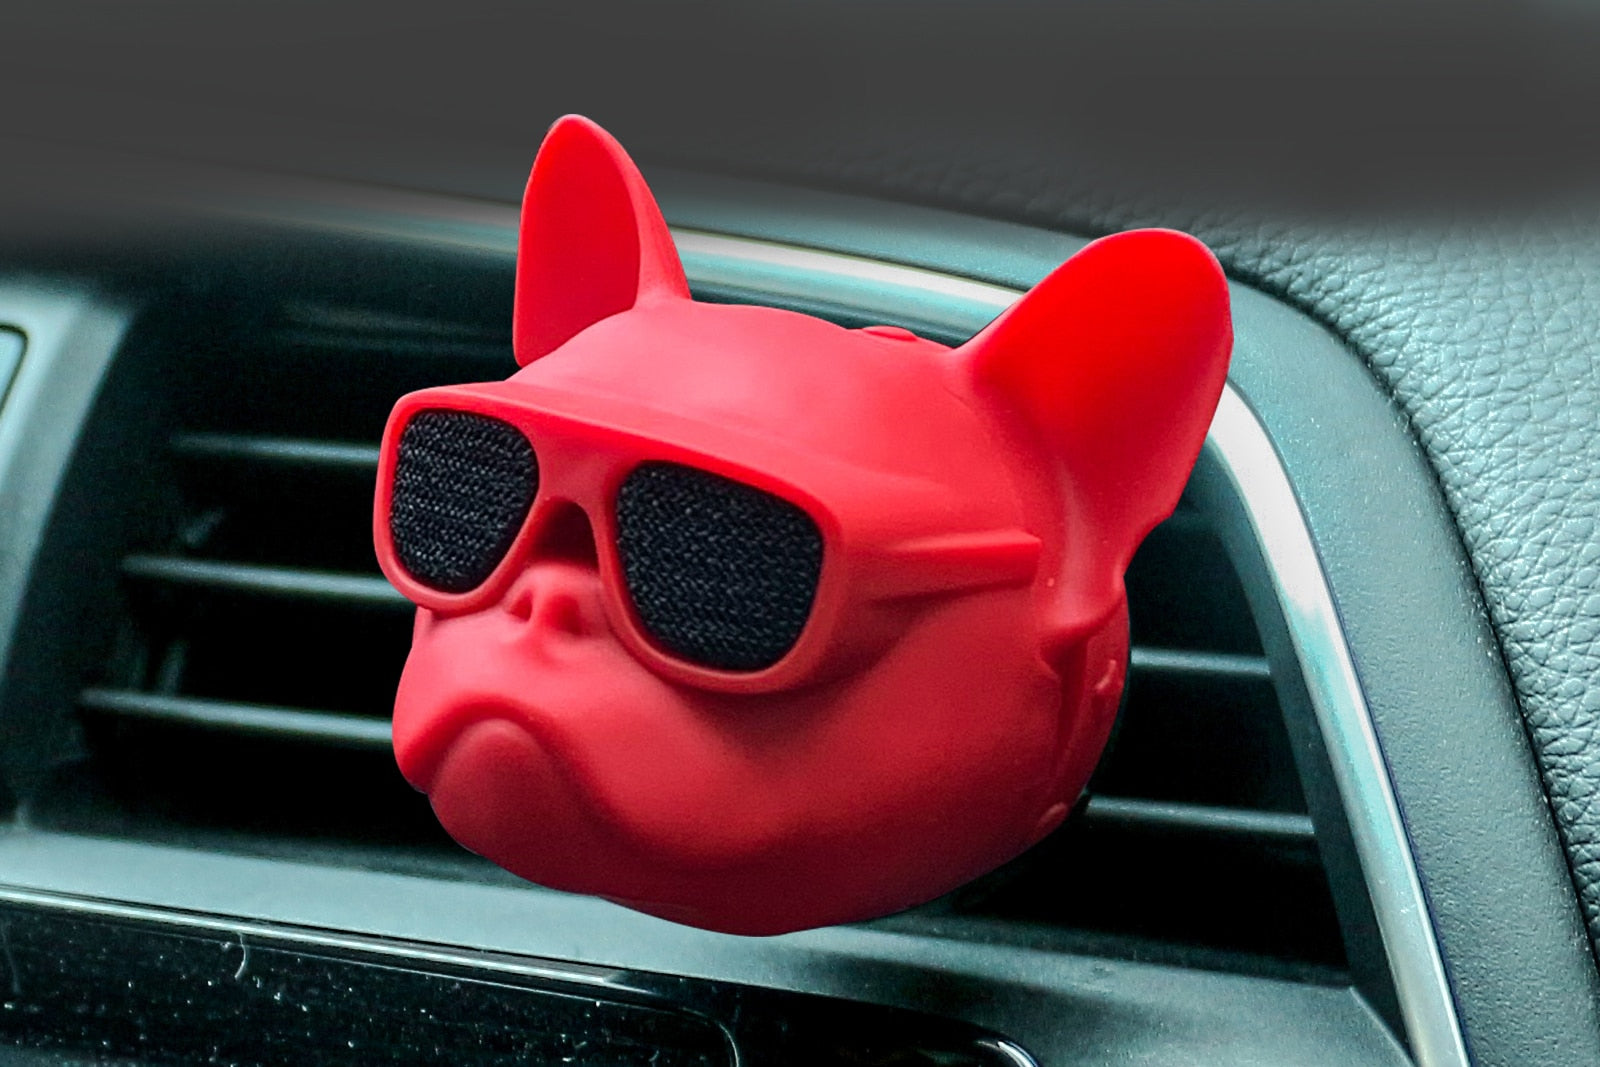 French Bulldog Car Air freshener - Style's Bug Red / Without any incense flakes